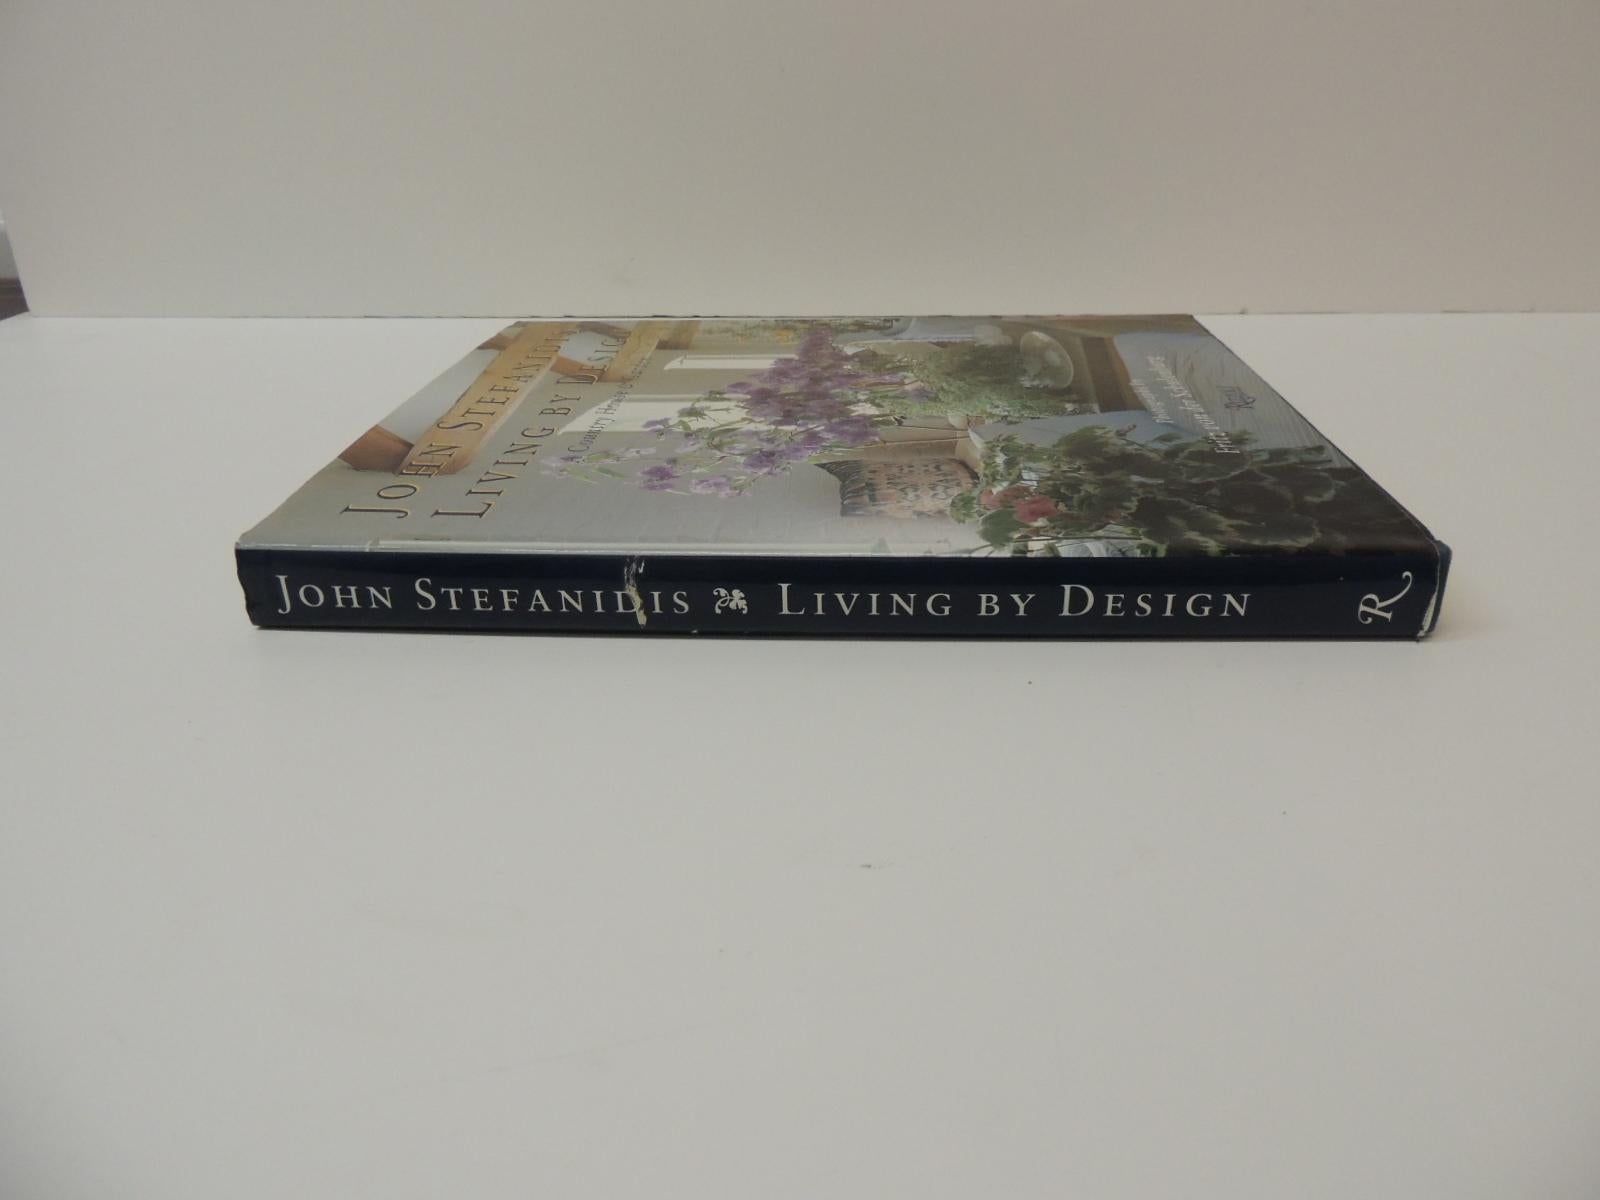 North American Living by Design Hard Cover Book by J. Stefanidis